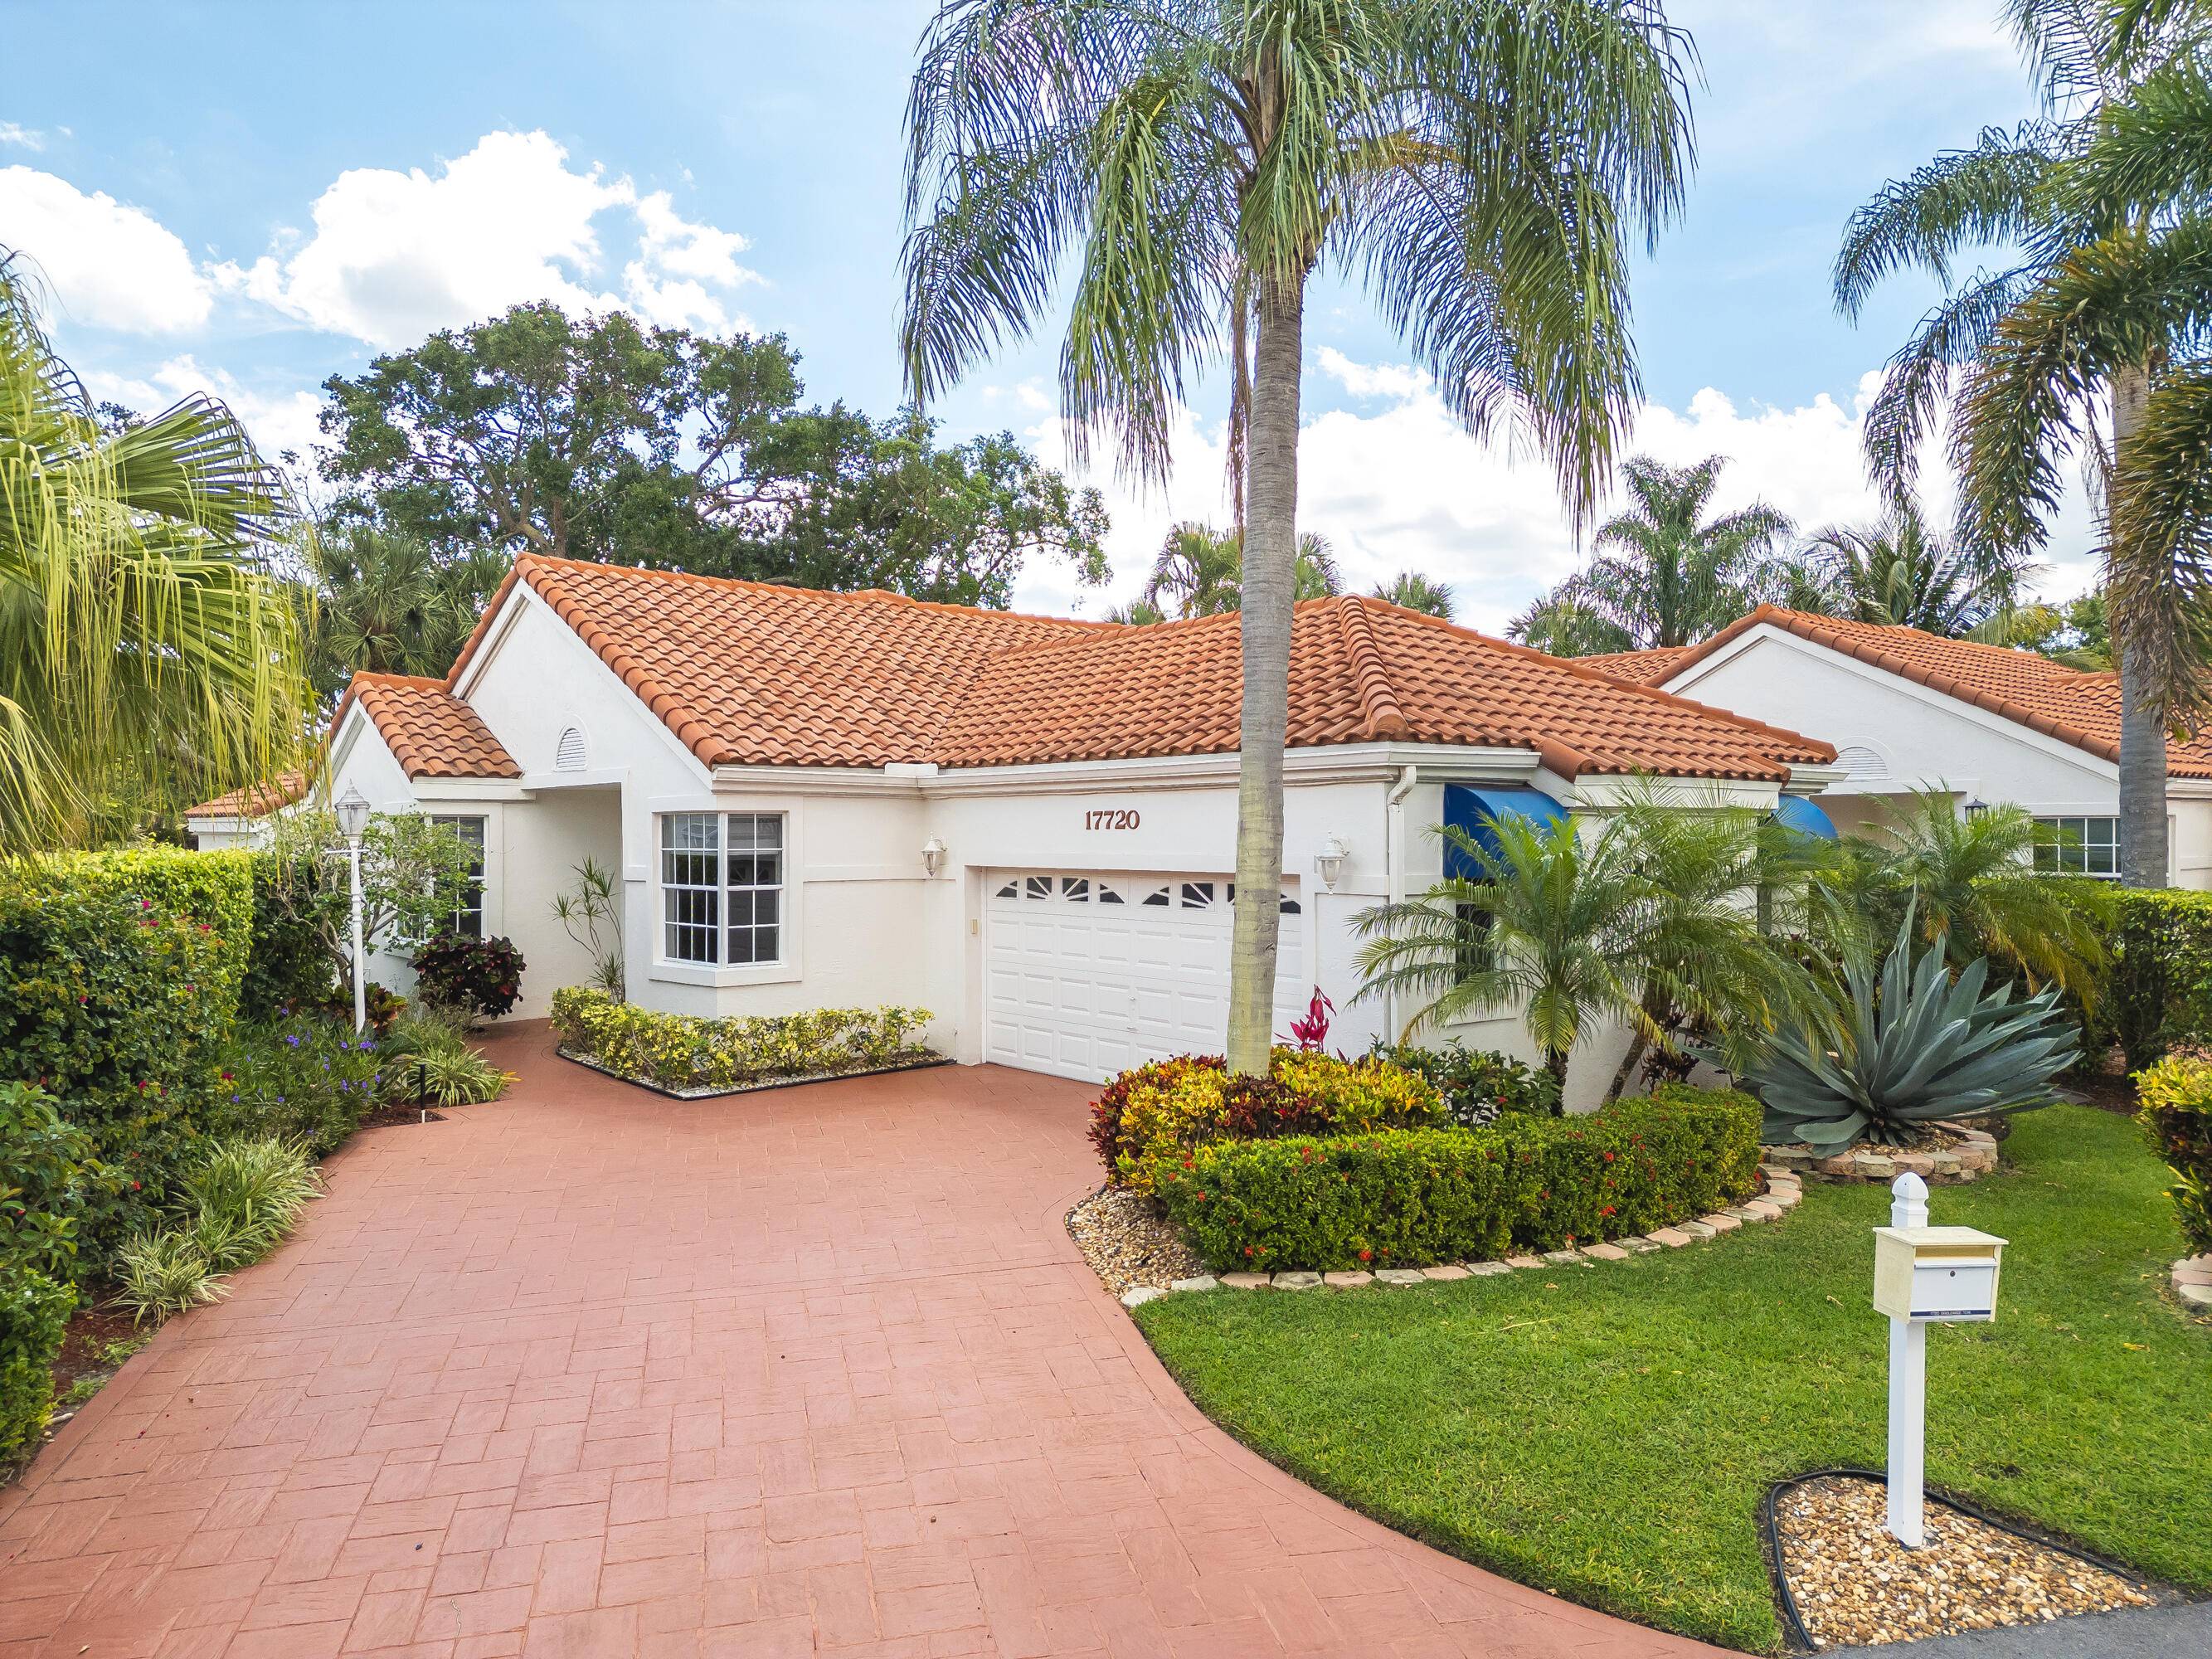 Beautiful 3 Bedroom 2 Bath single family home situated on a private lot overlooking the golf course in Boca Country Club.